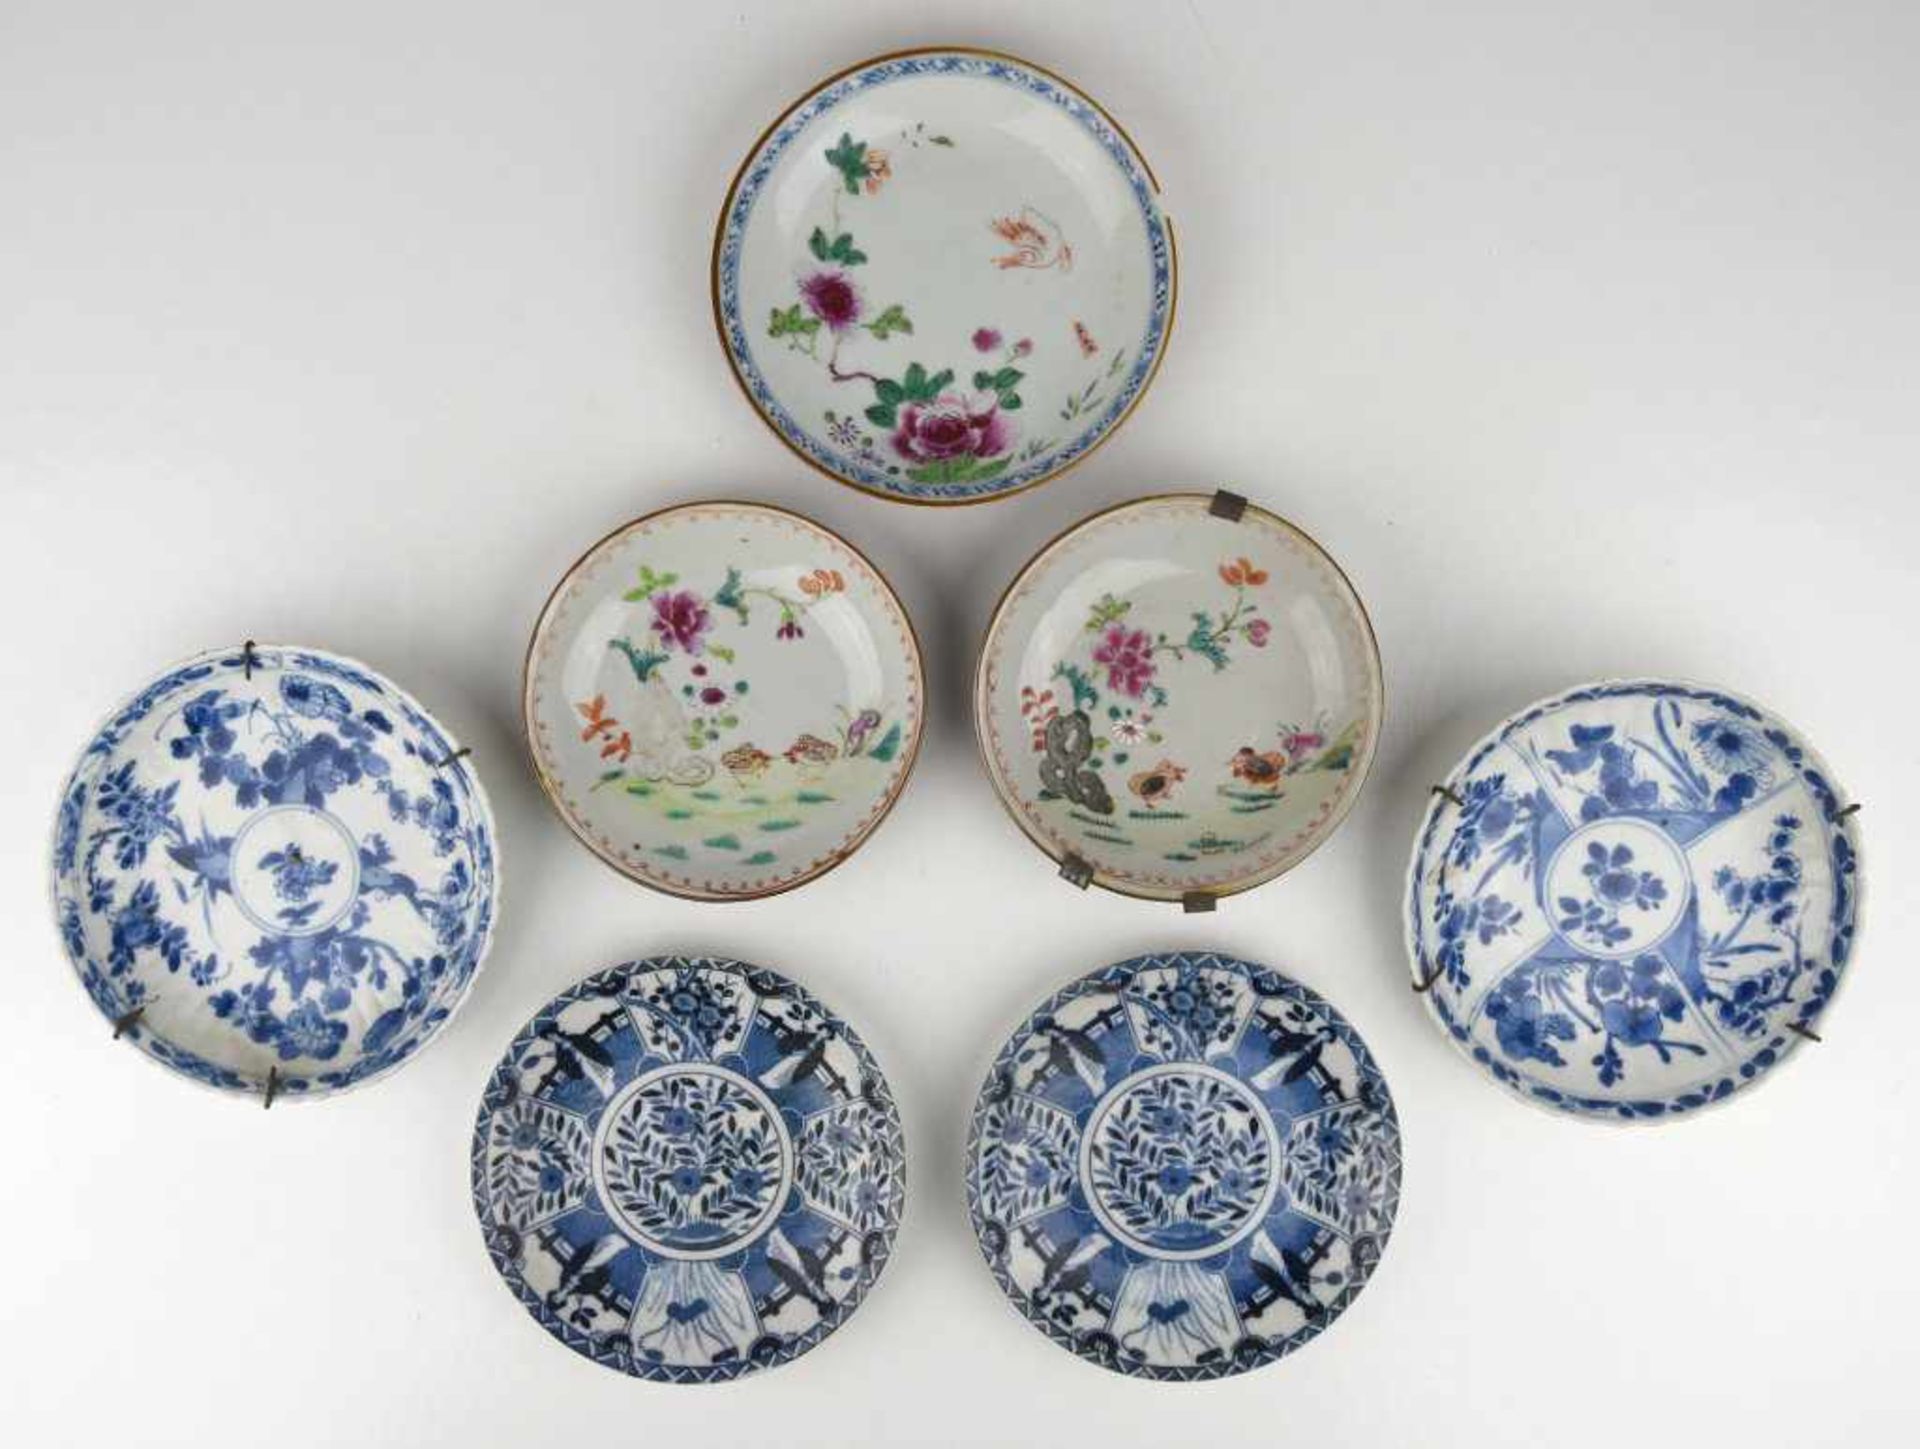 China - Group of seven porcelain plates blue and white or famille rose Chine - Ensemble de sept